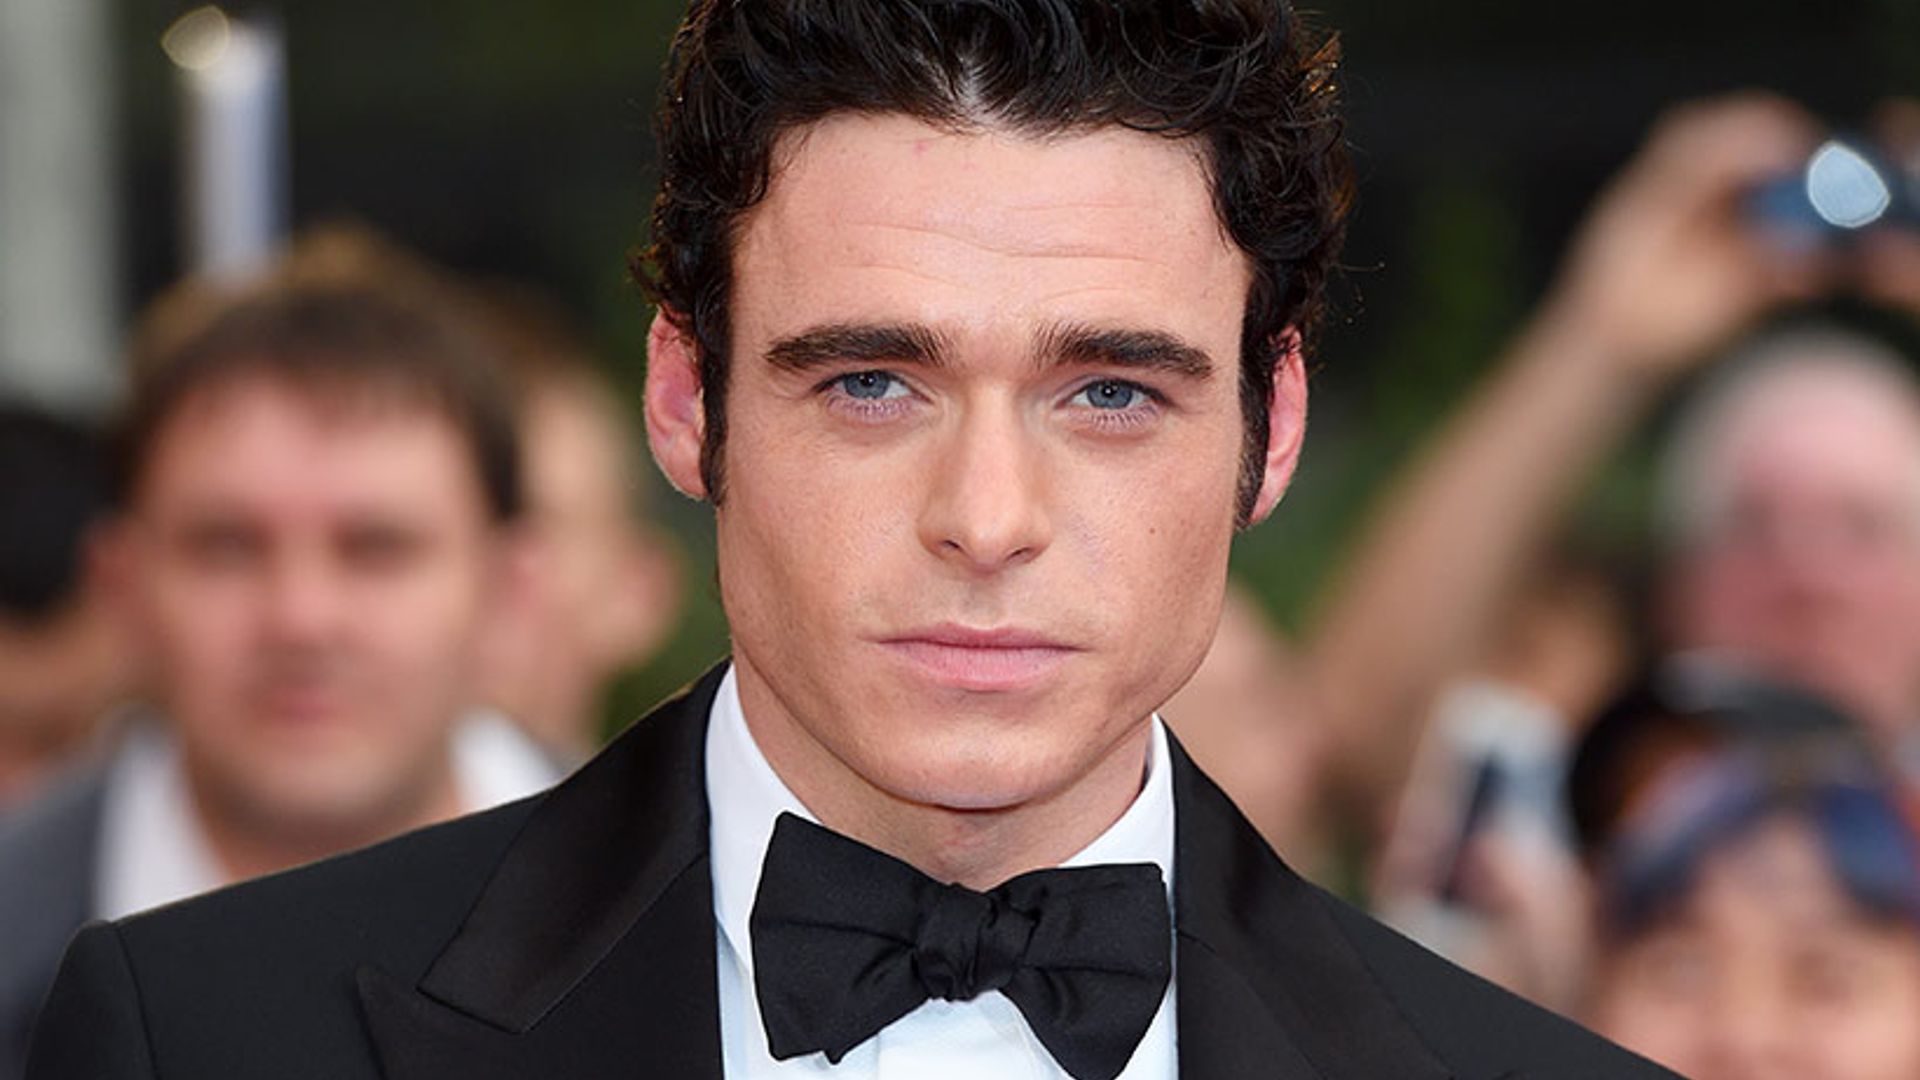 The Bodyguard's Richard Madden seriously smouldered on the red carpet at the GQ Awards